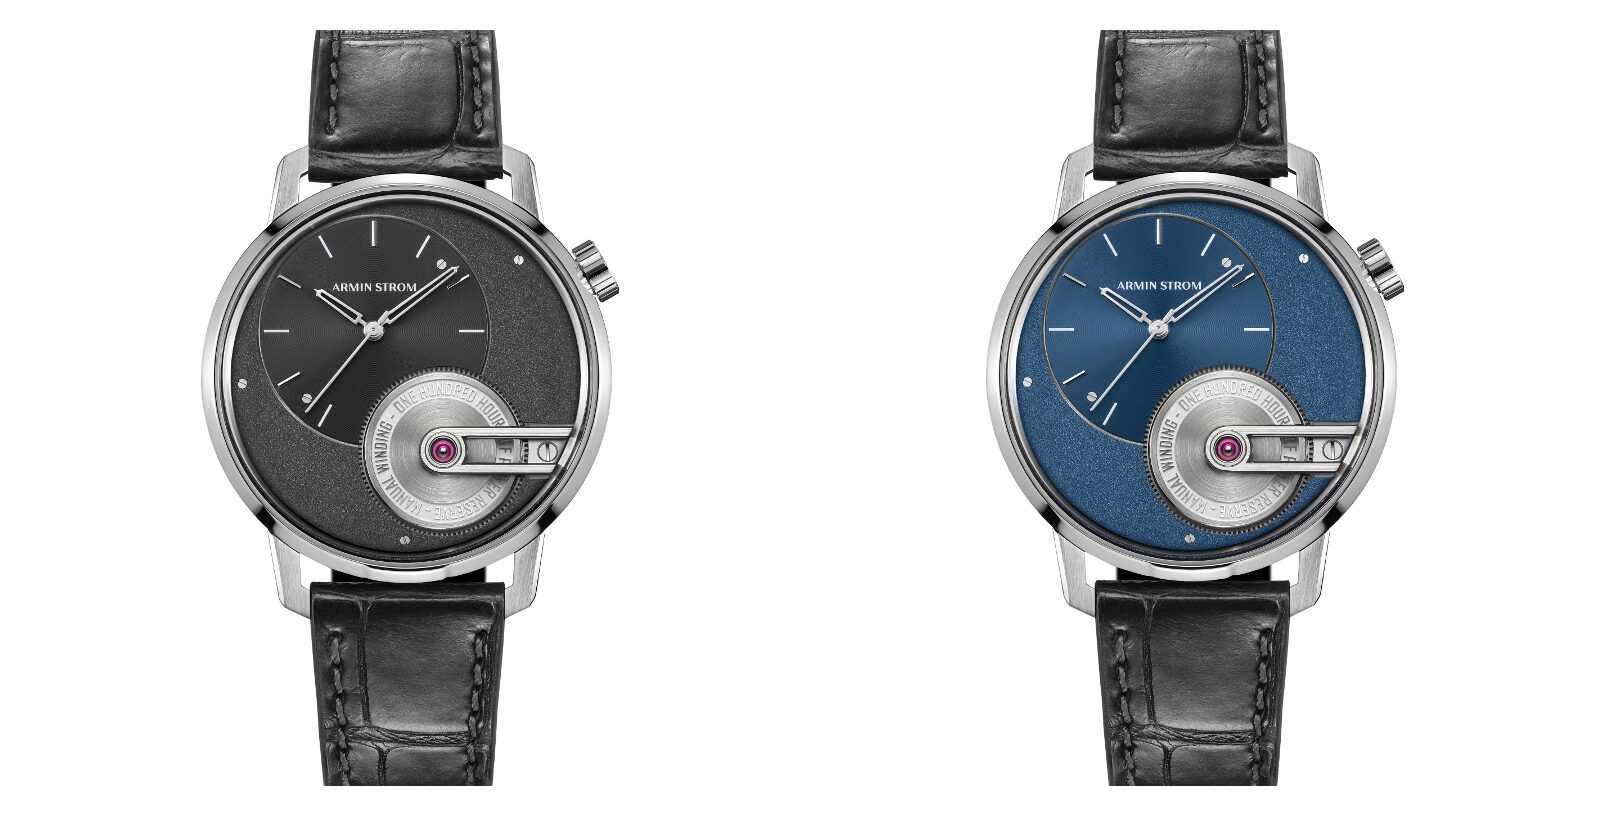 The two references – one with a black dial and one with a blue dial – are available in limited editions of 100 each.